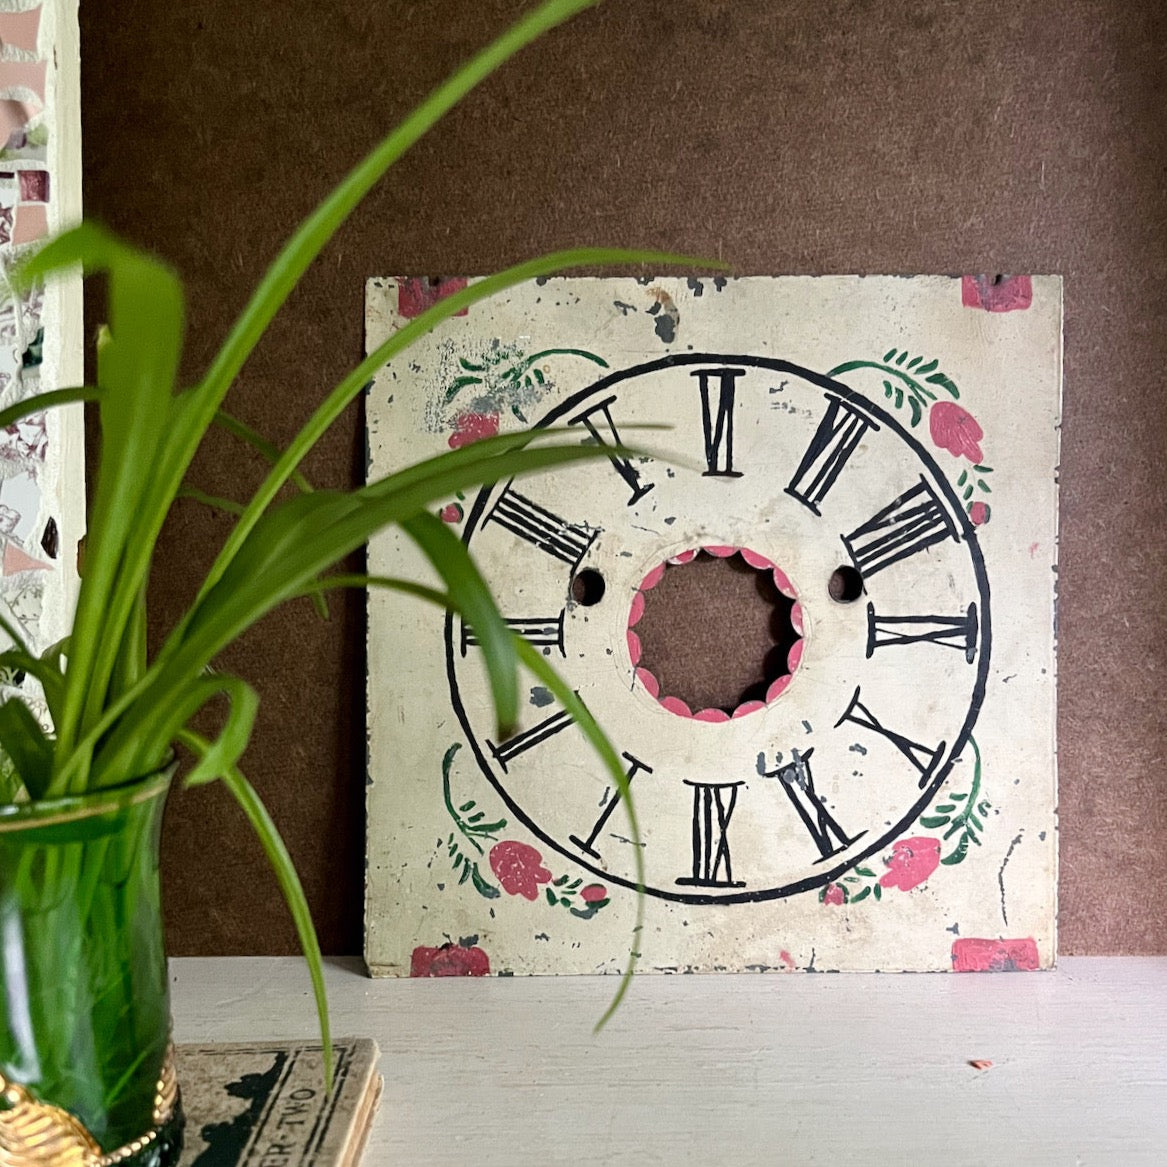 Old Hand Painted Pink Floral Clock Face